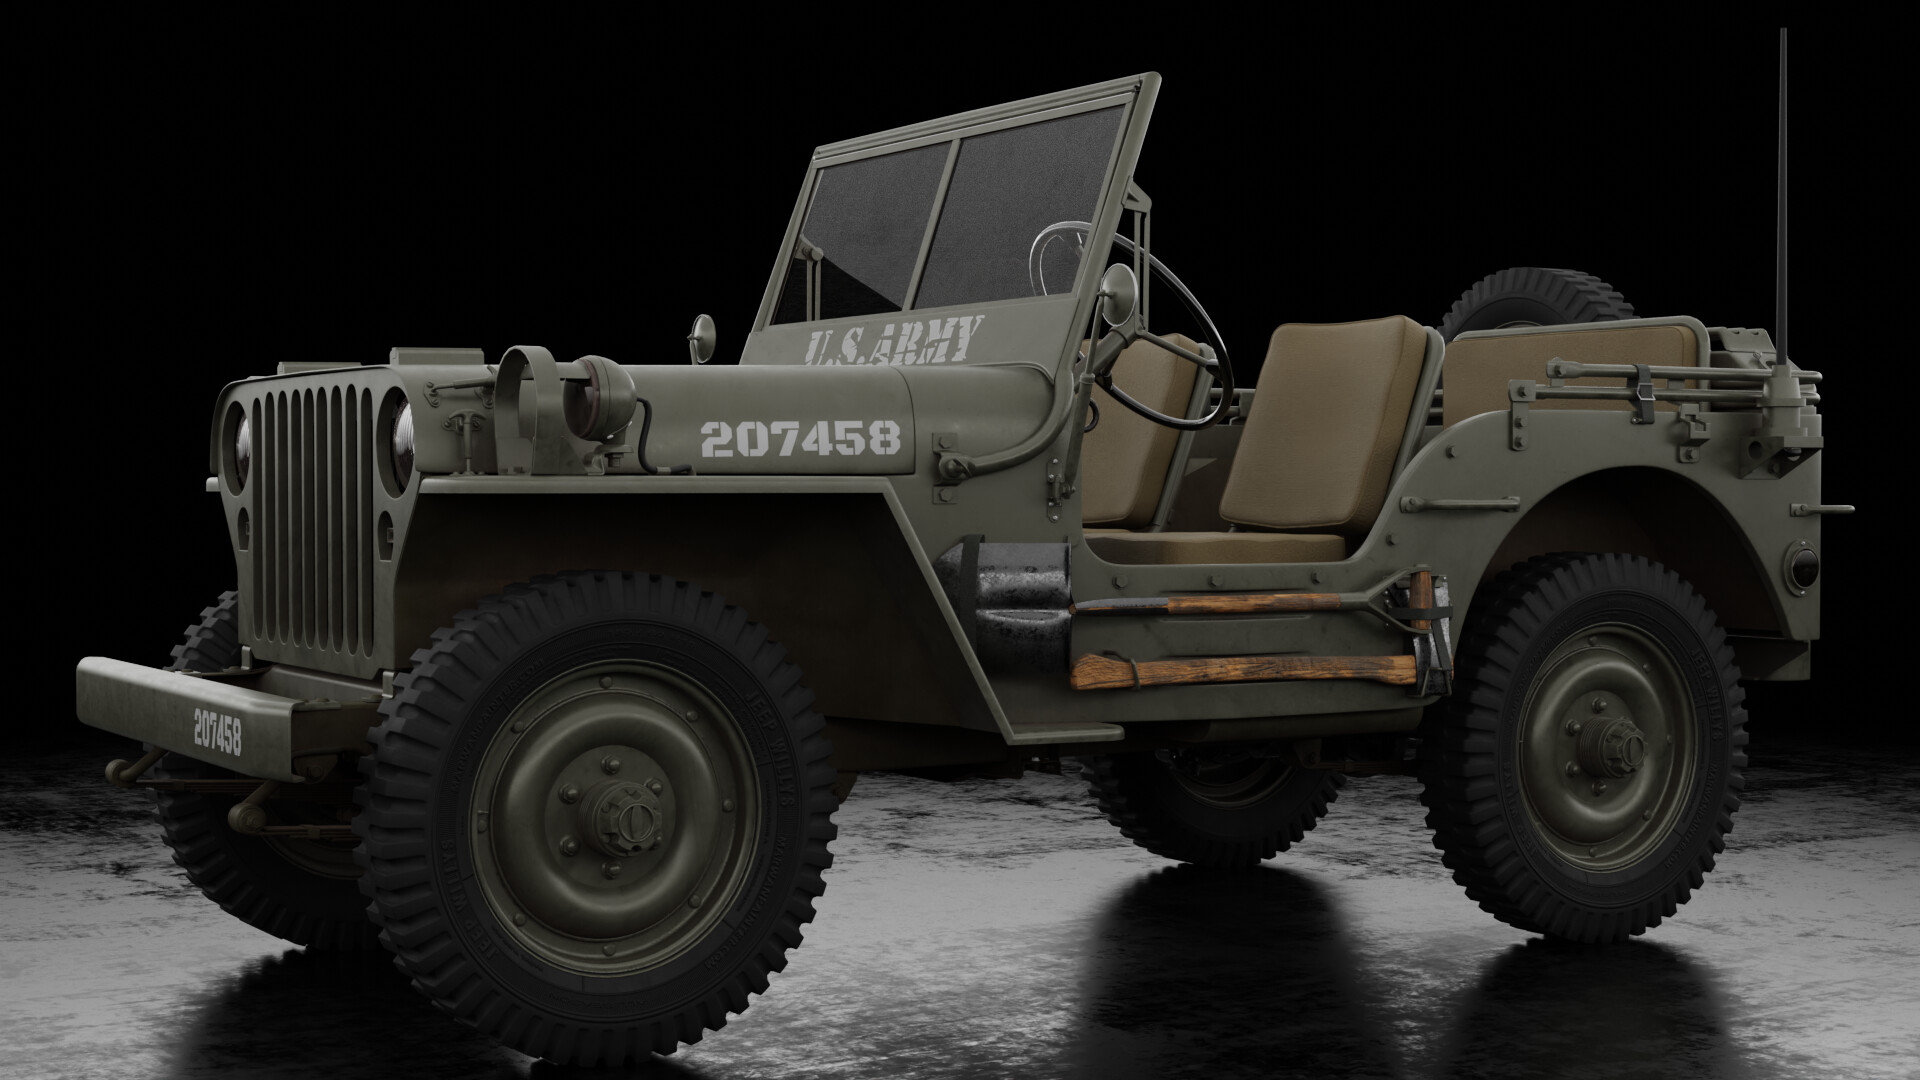 Jeep Willys MB 1941-1945 - Finished Projects - Blender Artists Community